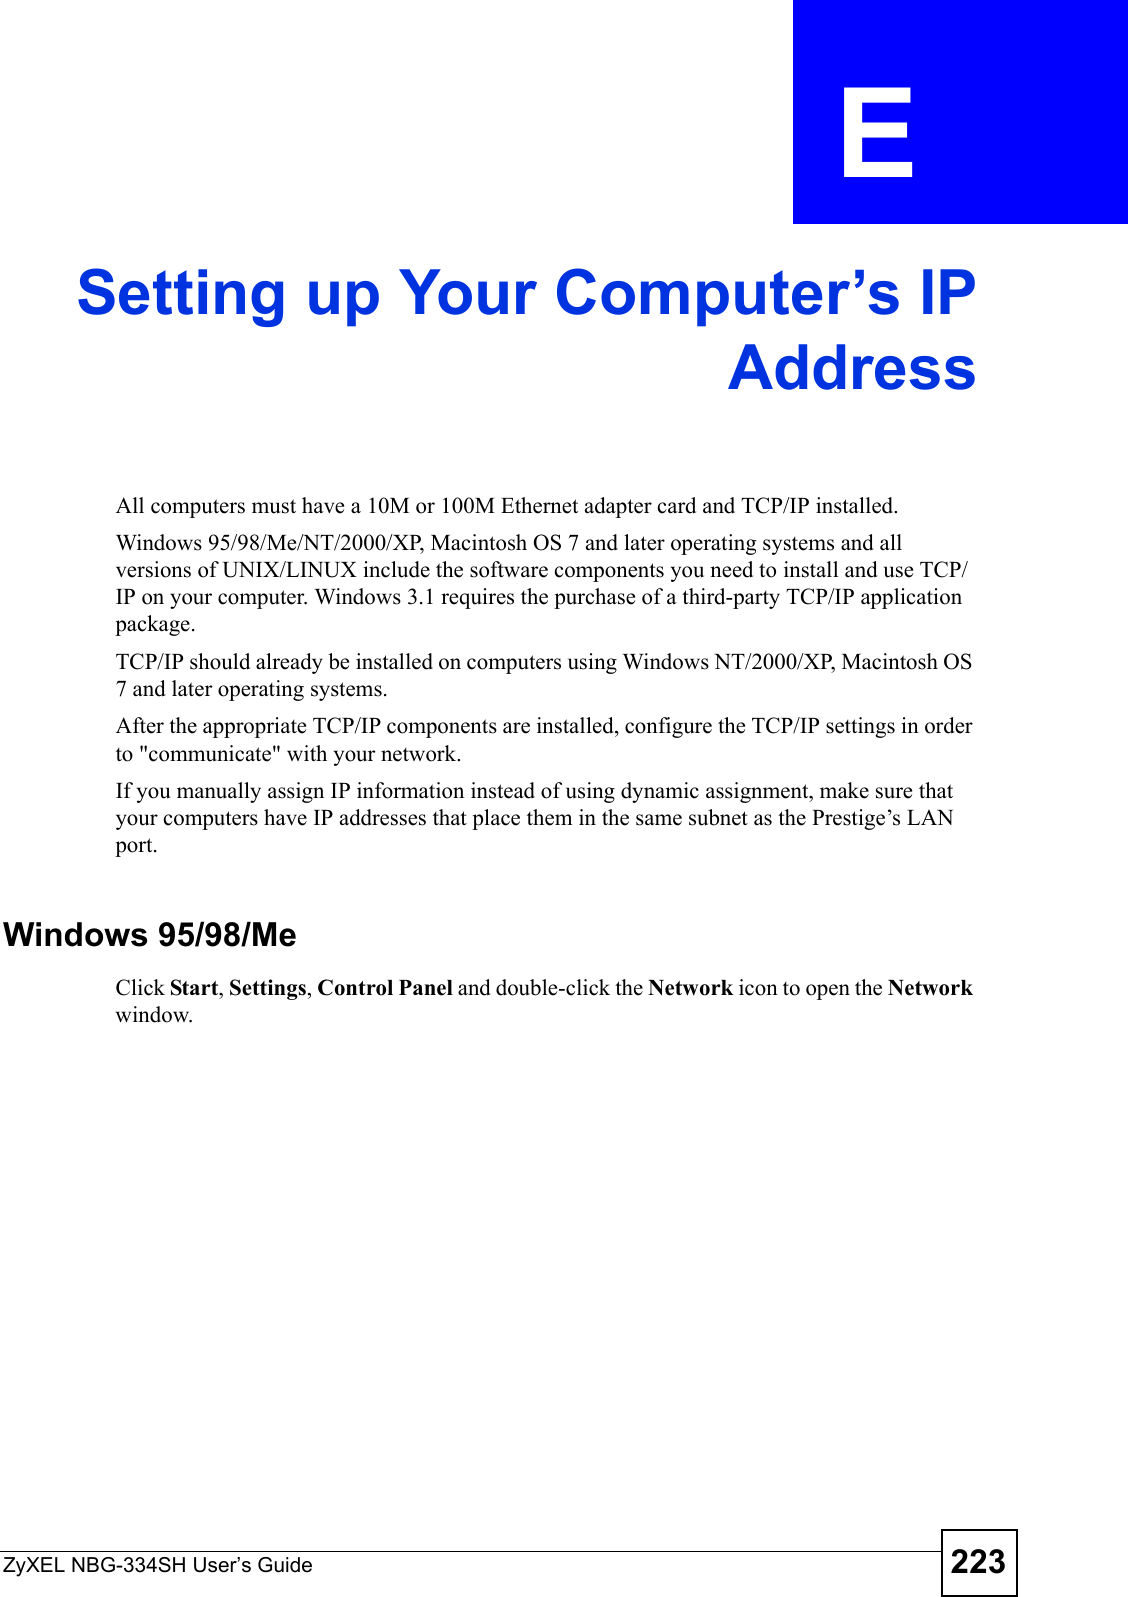 ZyXEL NBG-334SH User’s Guide 223APPENDIX  E Setting up Your Computer’s IPAddressAll computers must have a 10M or 100M Ethernet adapter card and TCP/IP installed. Windows 95/98/Me/NT/2000/XP, Macintosh OS 7 and later operating systems and all versions of UNIX/LINUX include the software components you need to install and use TCP/IP on your computer. Windows 3.1 requires the purchase of a third-party TCP/IP application package.TCP/IP should already be installed on computers using Windows NT/2000/XP, Macintosh OS 7 and later operating systems.After the appropriate TCP/IP components are installed, configure the TCP/IP settings in order to &quot;communicate&quot; with your network. If you manually assign IP information instead of using dynamic assignment, make sure that your computers have IP addresses that place them in the same subnet as the Prestige’s LAN port.Windows 95/98/MeClick Start, Settings, Control Panel and double-click the Network icon to open the Network window.